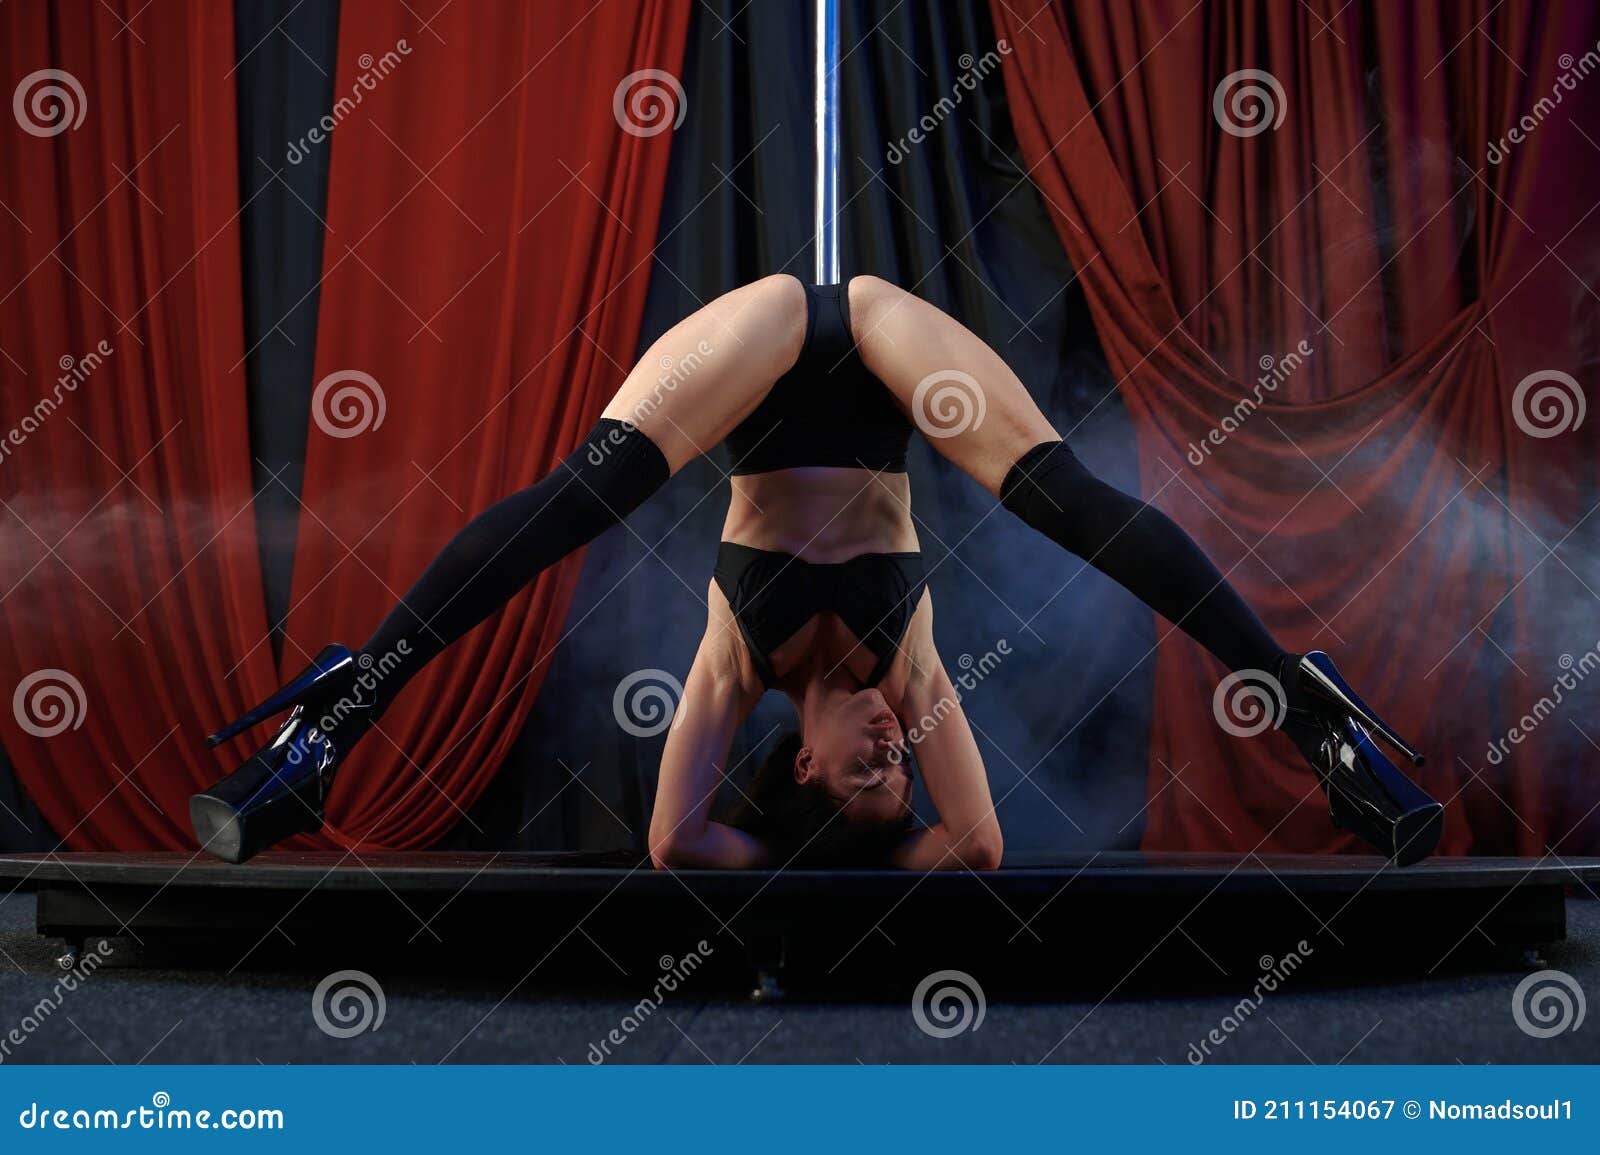 diana perrett recommends striptease dance sexy pic